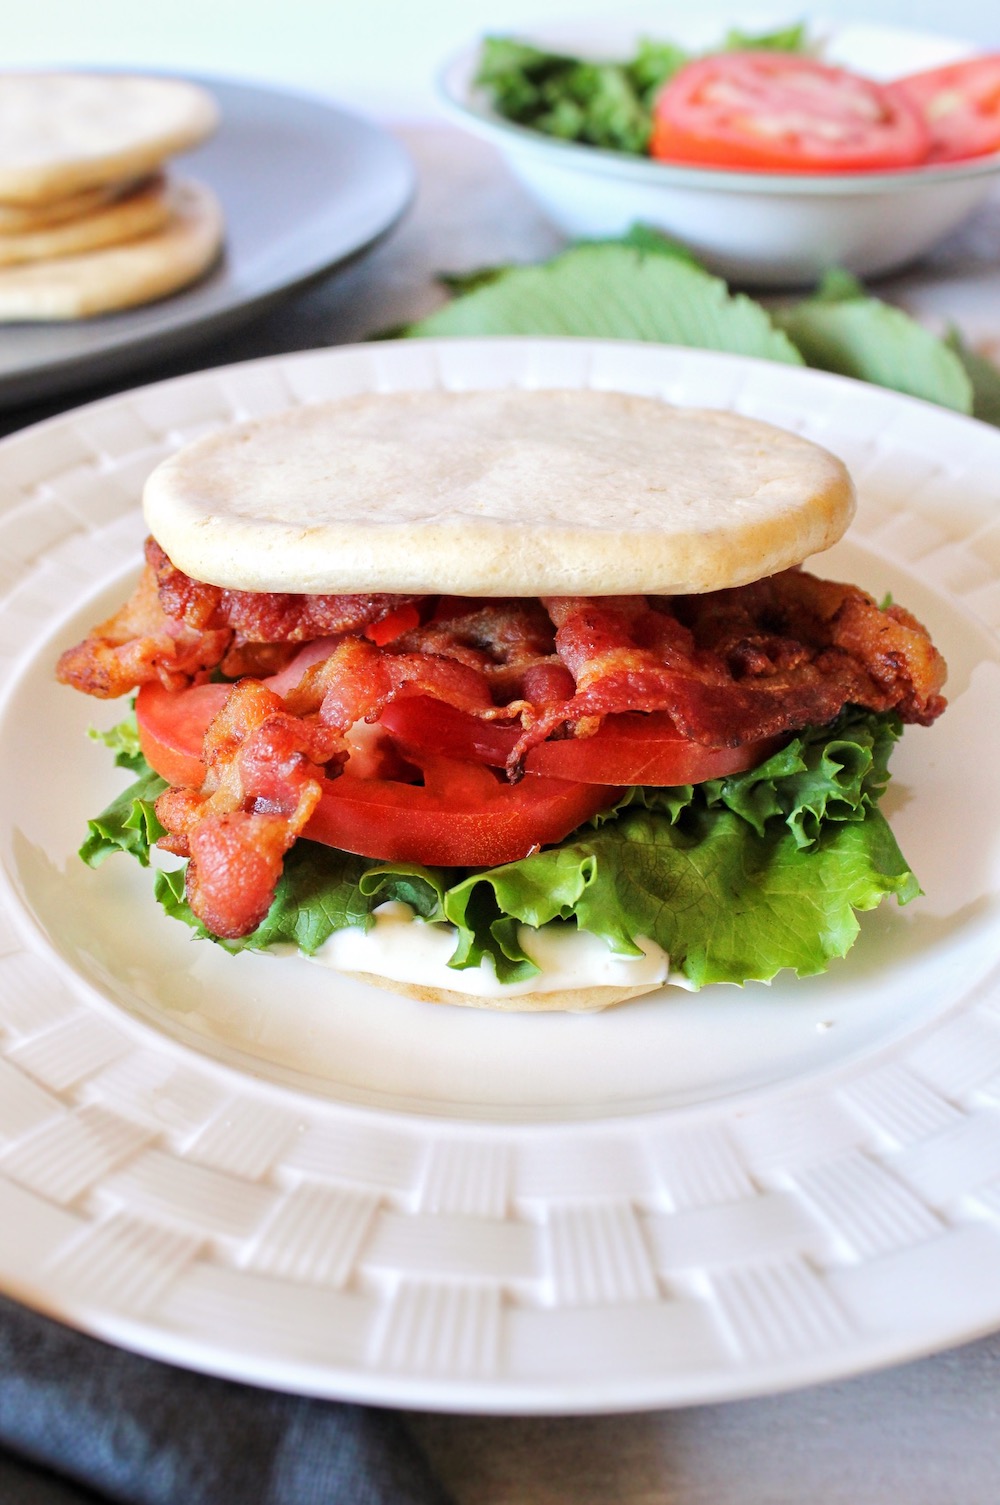 This BLT recipe is great for kids, spouses, and even non-keto guests.